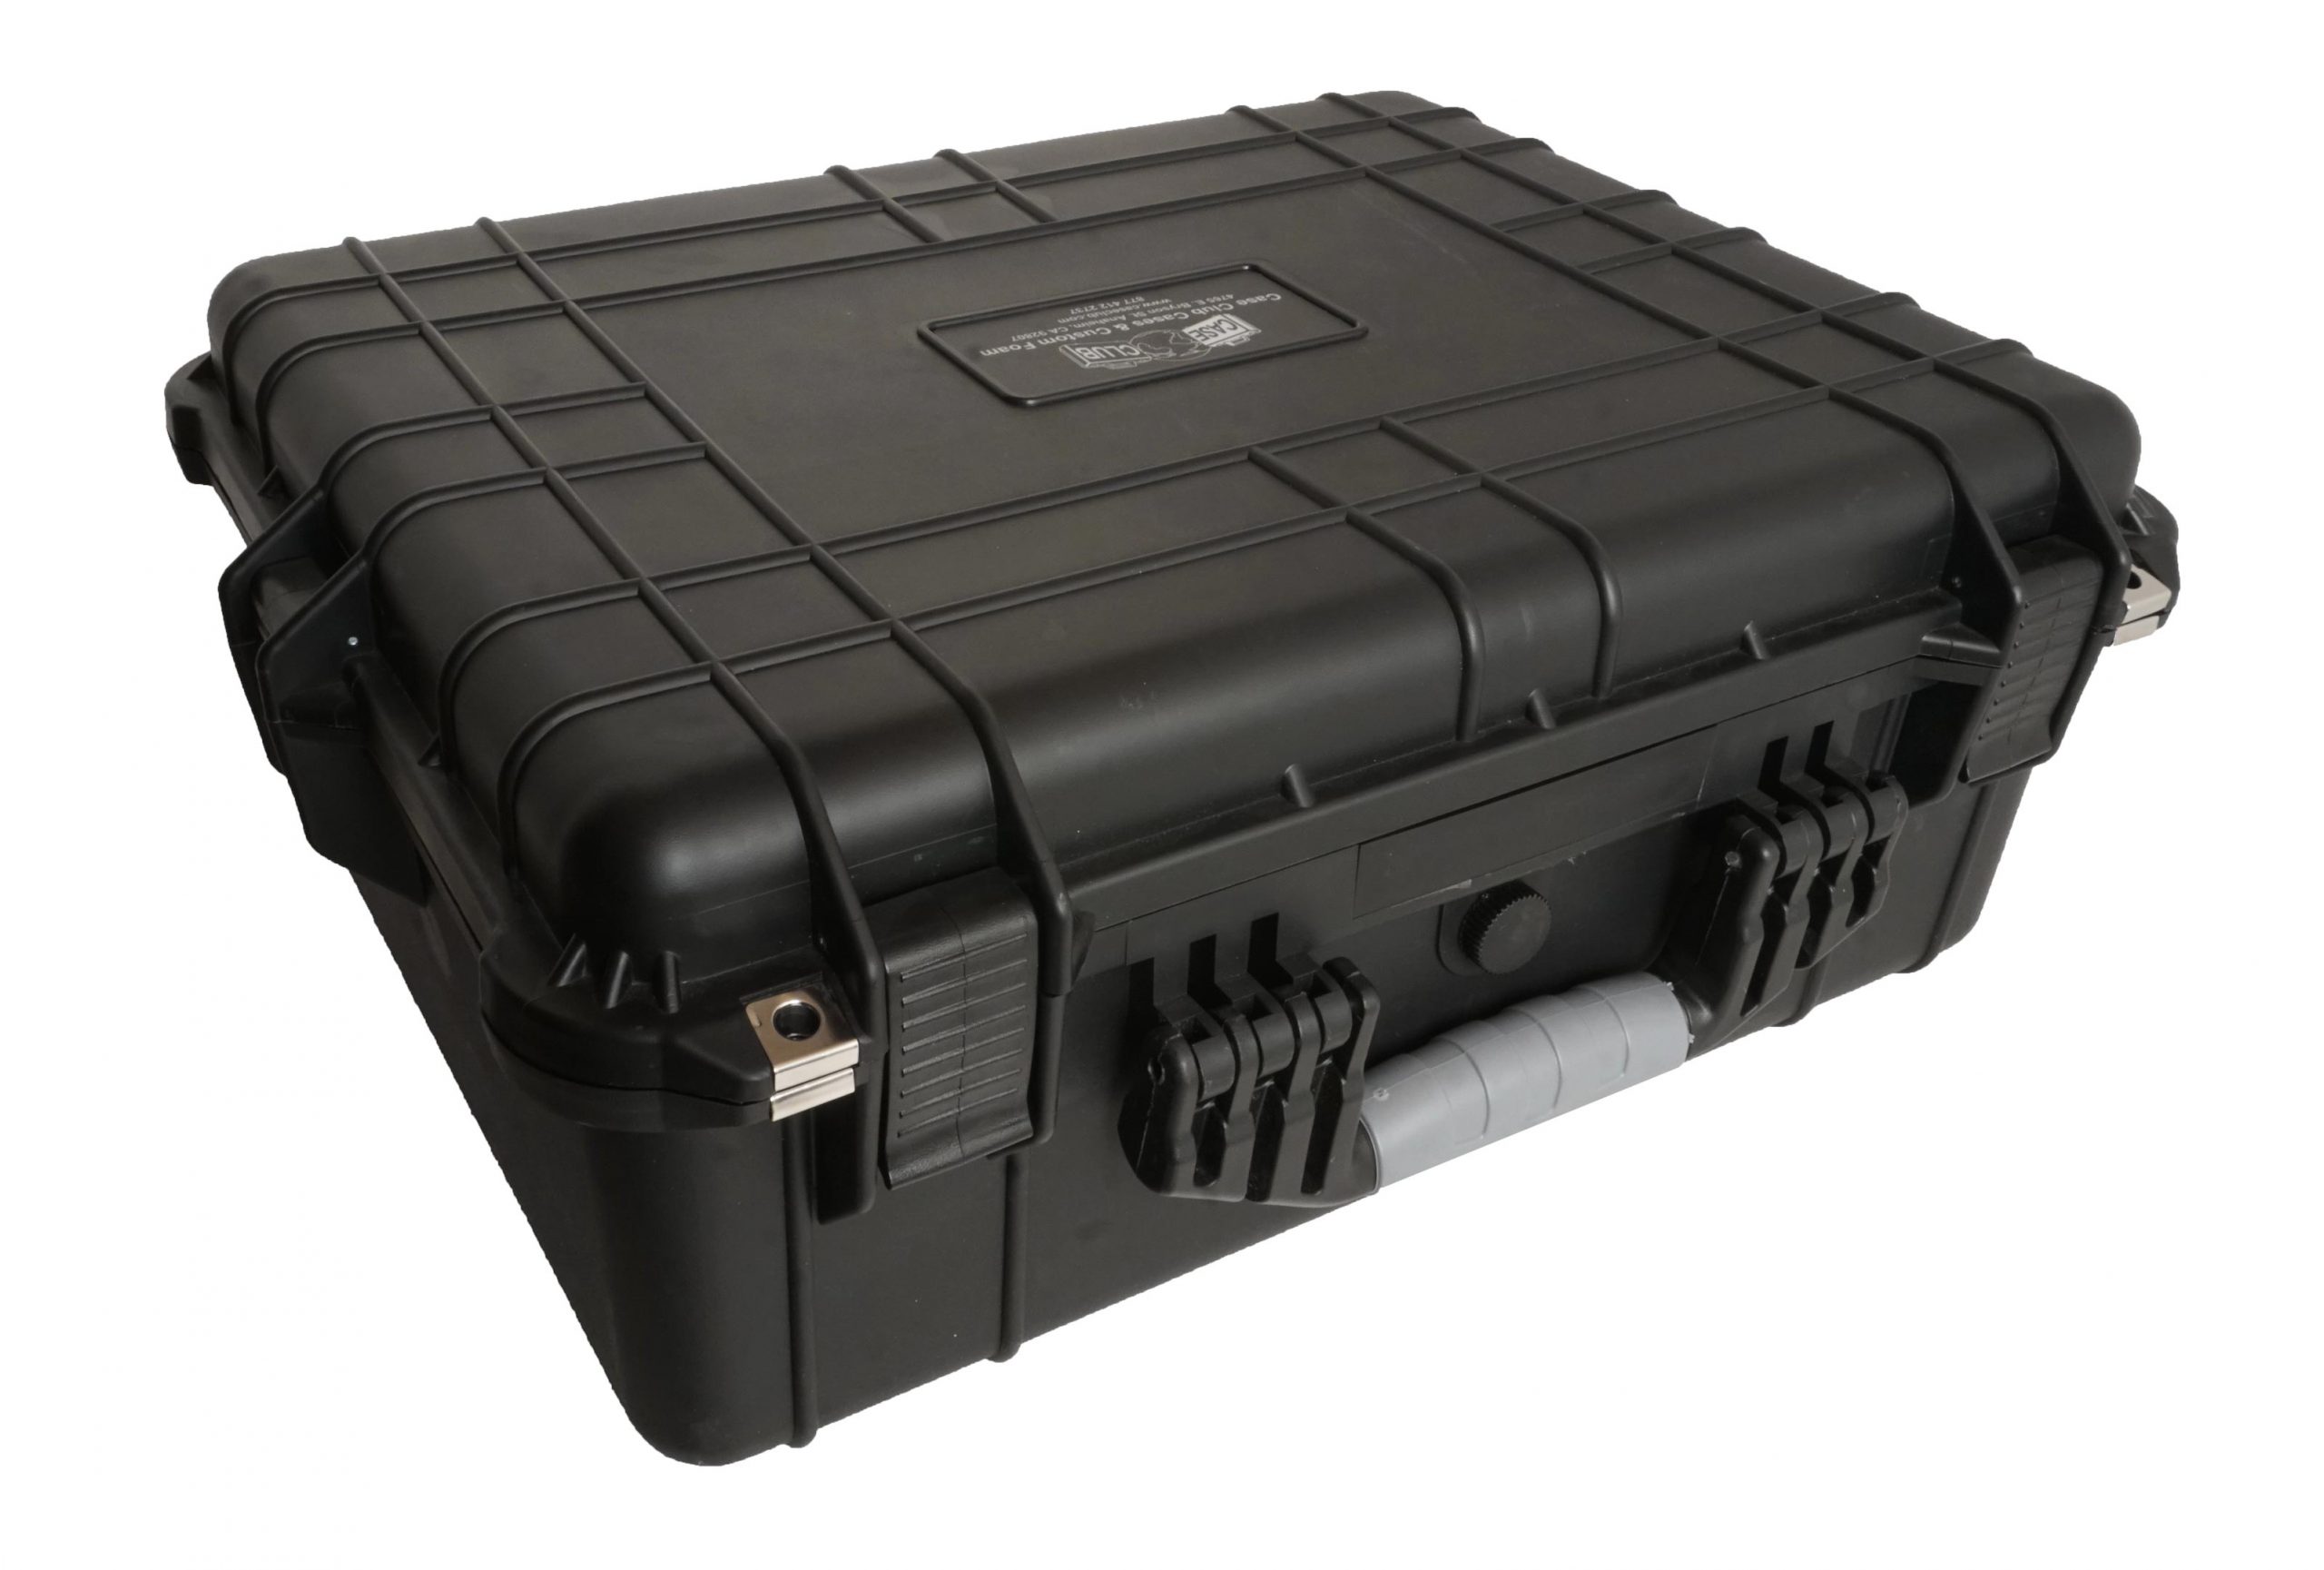 Case Club 8 Revolver & Accessory Waterproof Case with Wheels and Silica Gel 